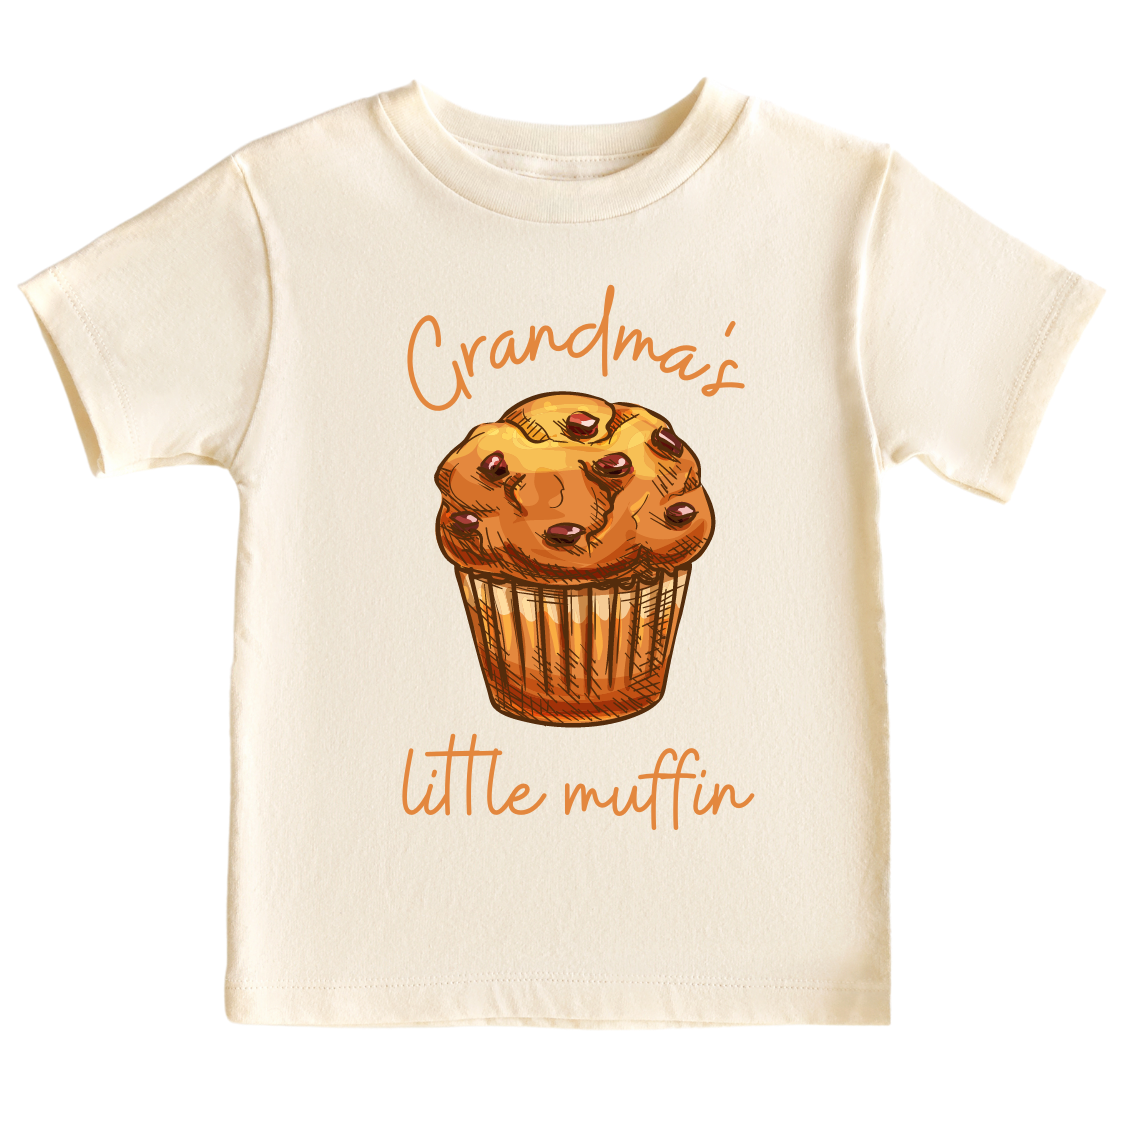 Kid's t-shirt with a cute printed design of a muffin and customizable text that says, 'Grandma's Little Muffin